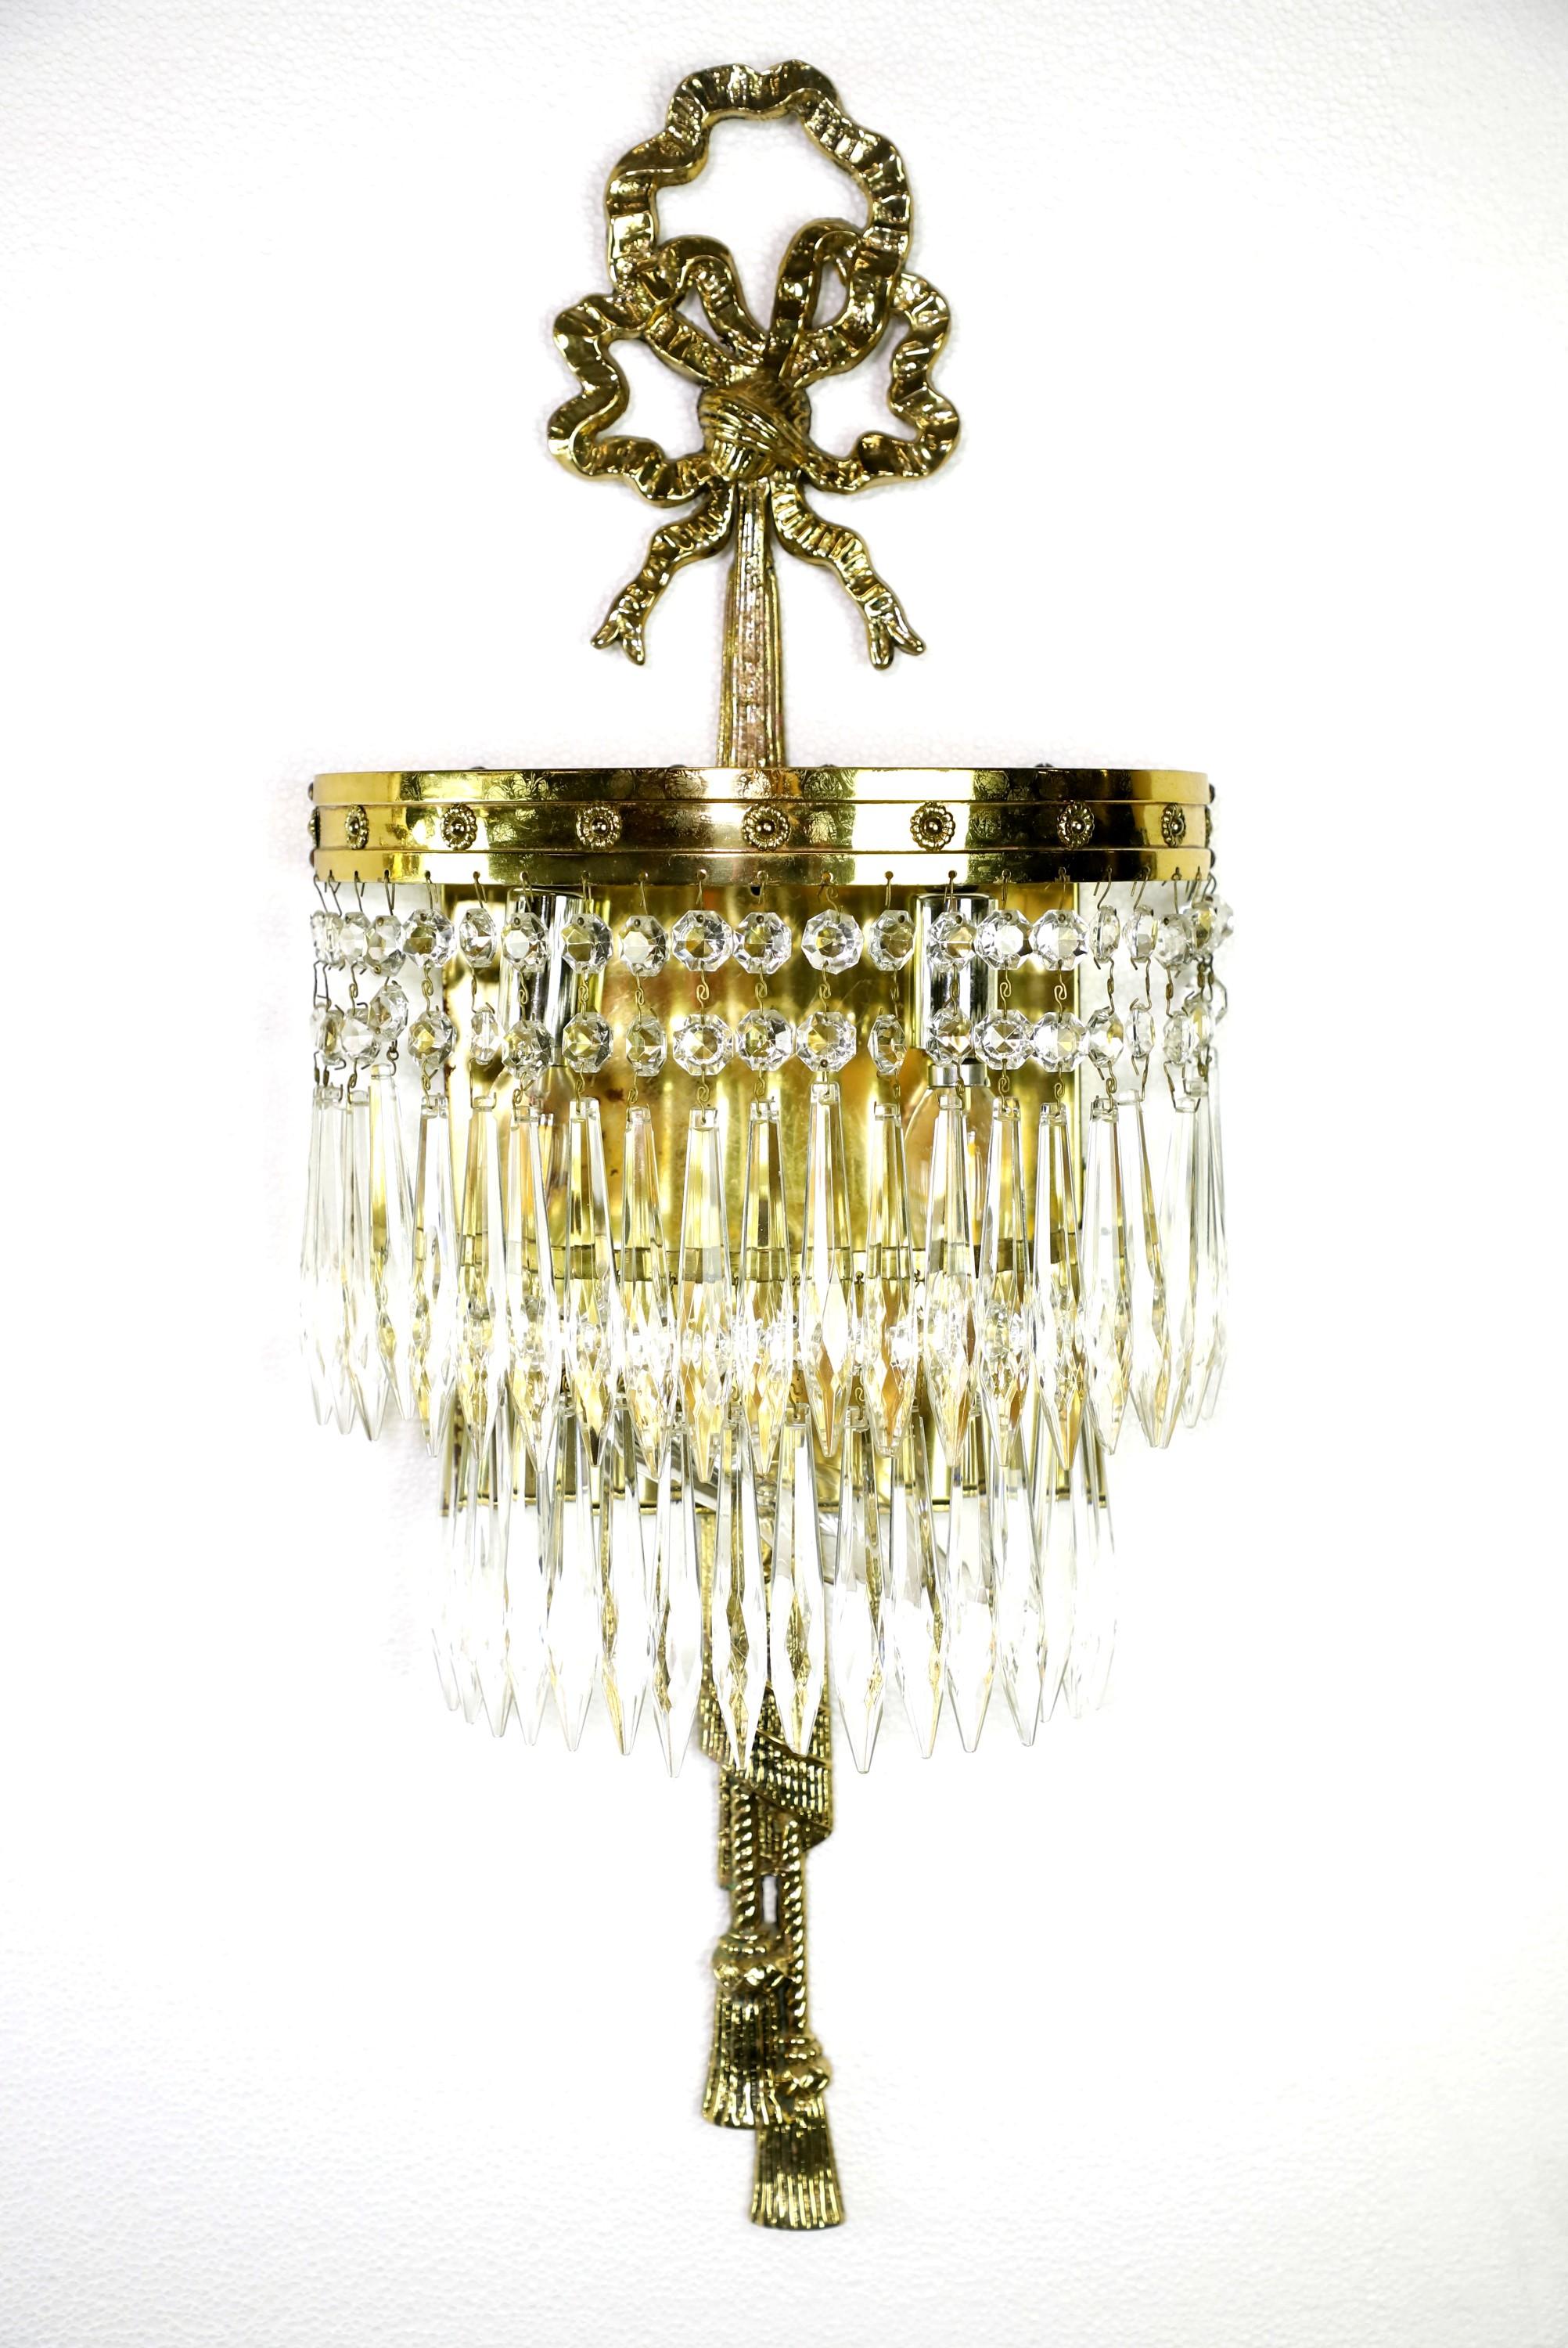 20th century pair of wall sconces sourced from the NYC Waldorf Astoria Hotel Park Ave South conference room. Regency style clear crystal wall sconces featuring a polished brass ribbon and tassel frame design. Cleaned and restored. Each sconce take